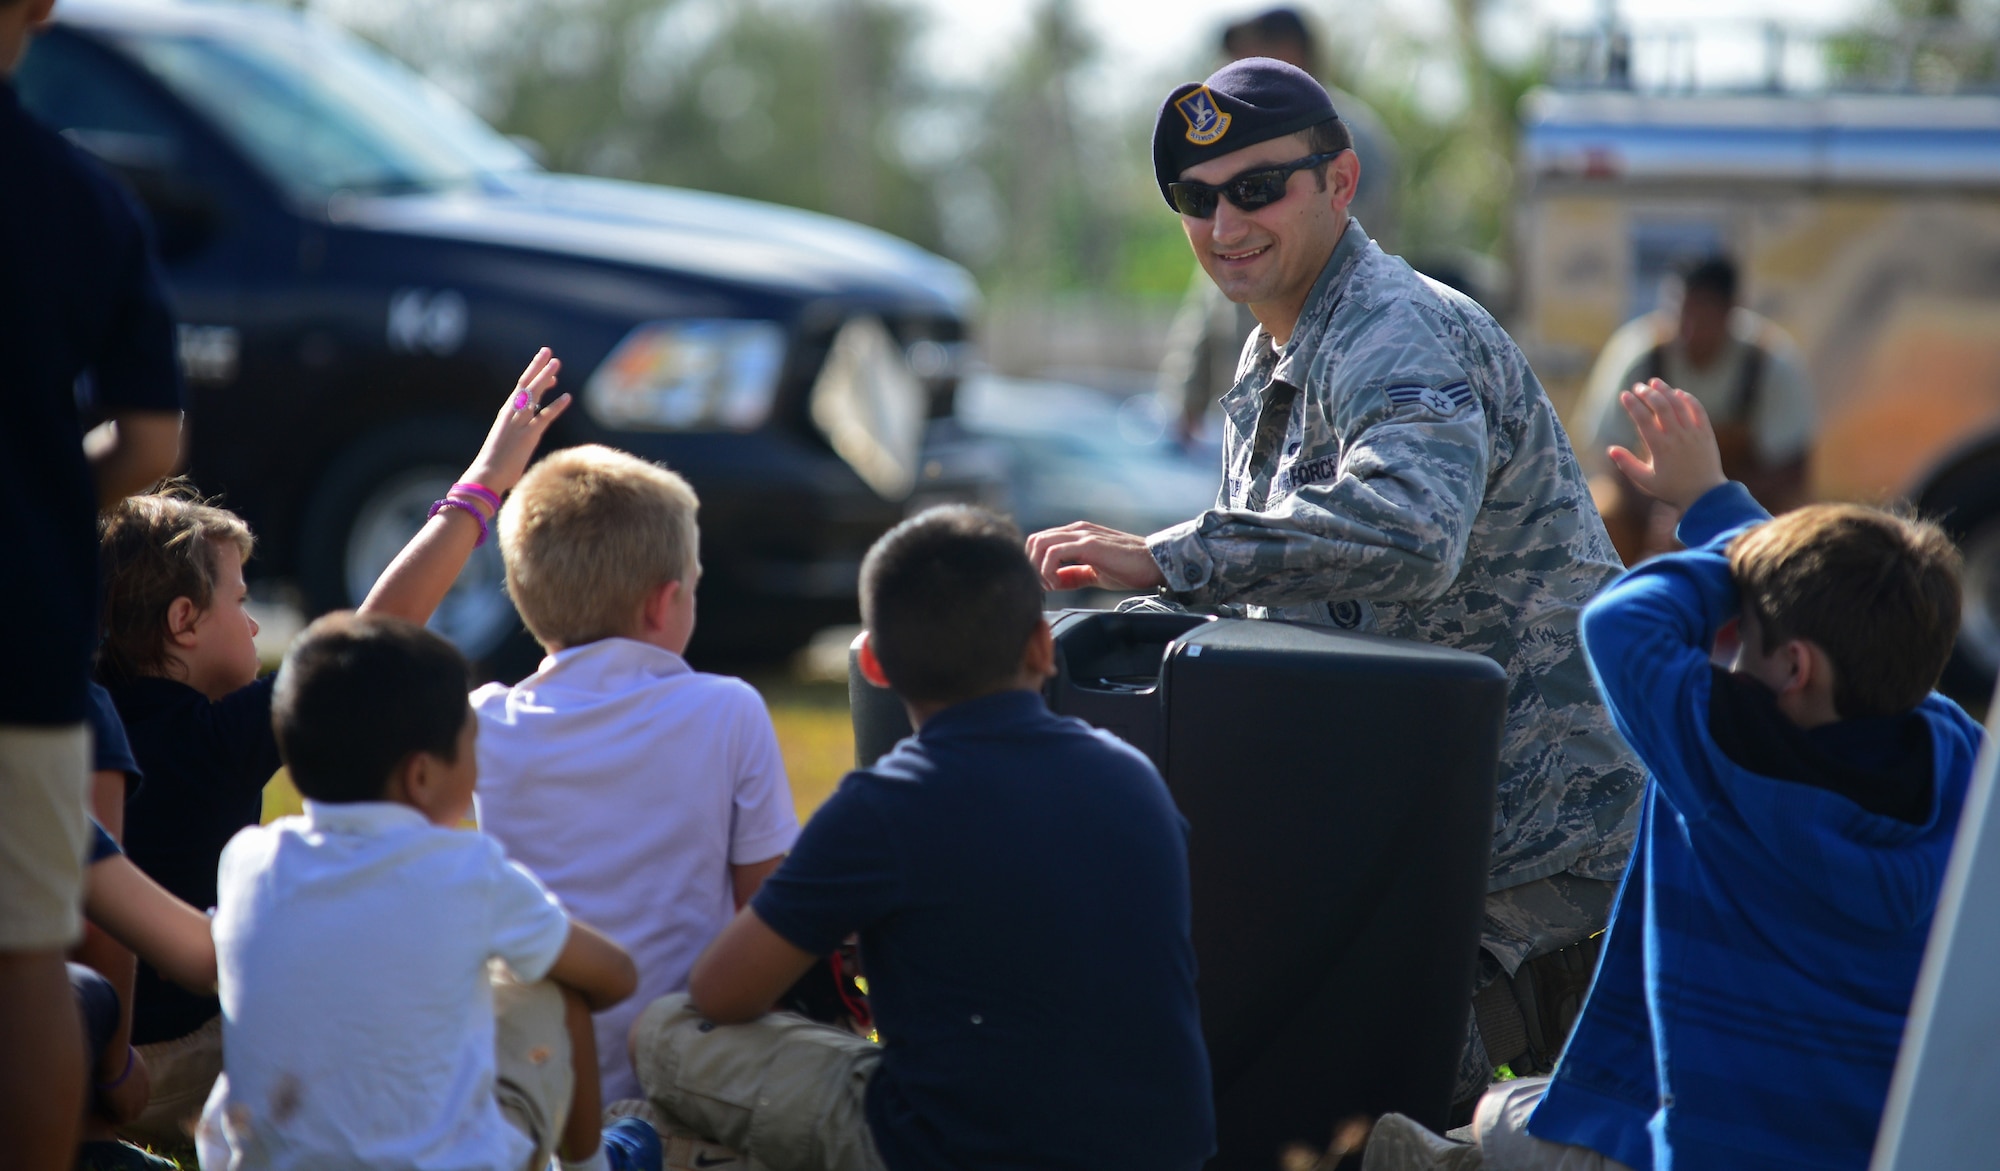 Senior Airman Casey Wheatley, 36th Security Forces Squadron military working dog handler, interacts with students during a MWD demonstration May 17, 2016, at Andersen Air Force Base, Guam. Airmen from the 36th SFS, 736th SFS and Air Force Office of Special Investigations Det. 602 displayed their gear and skillsets to Andersen students. (U.S. Air Force photo by Senior Airman Joshua Smoot)